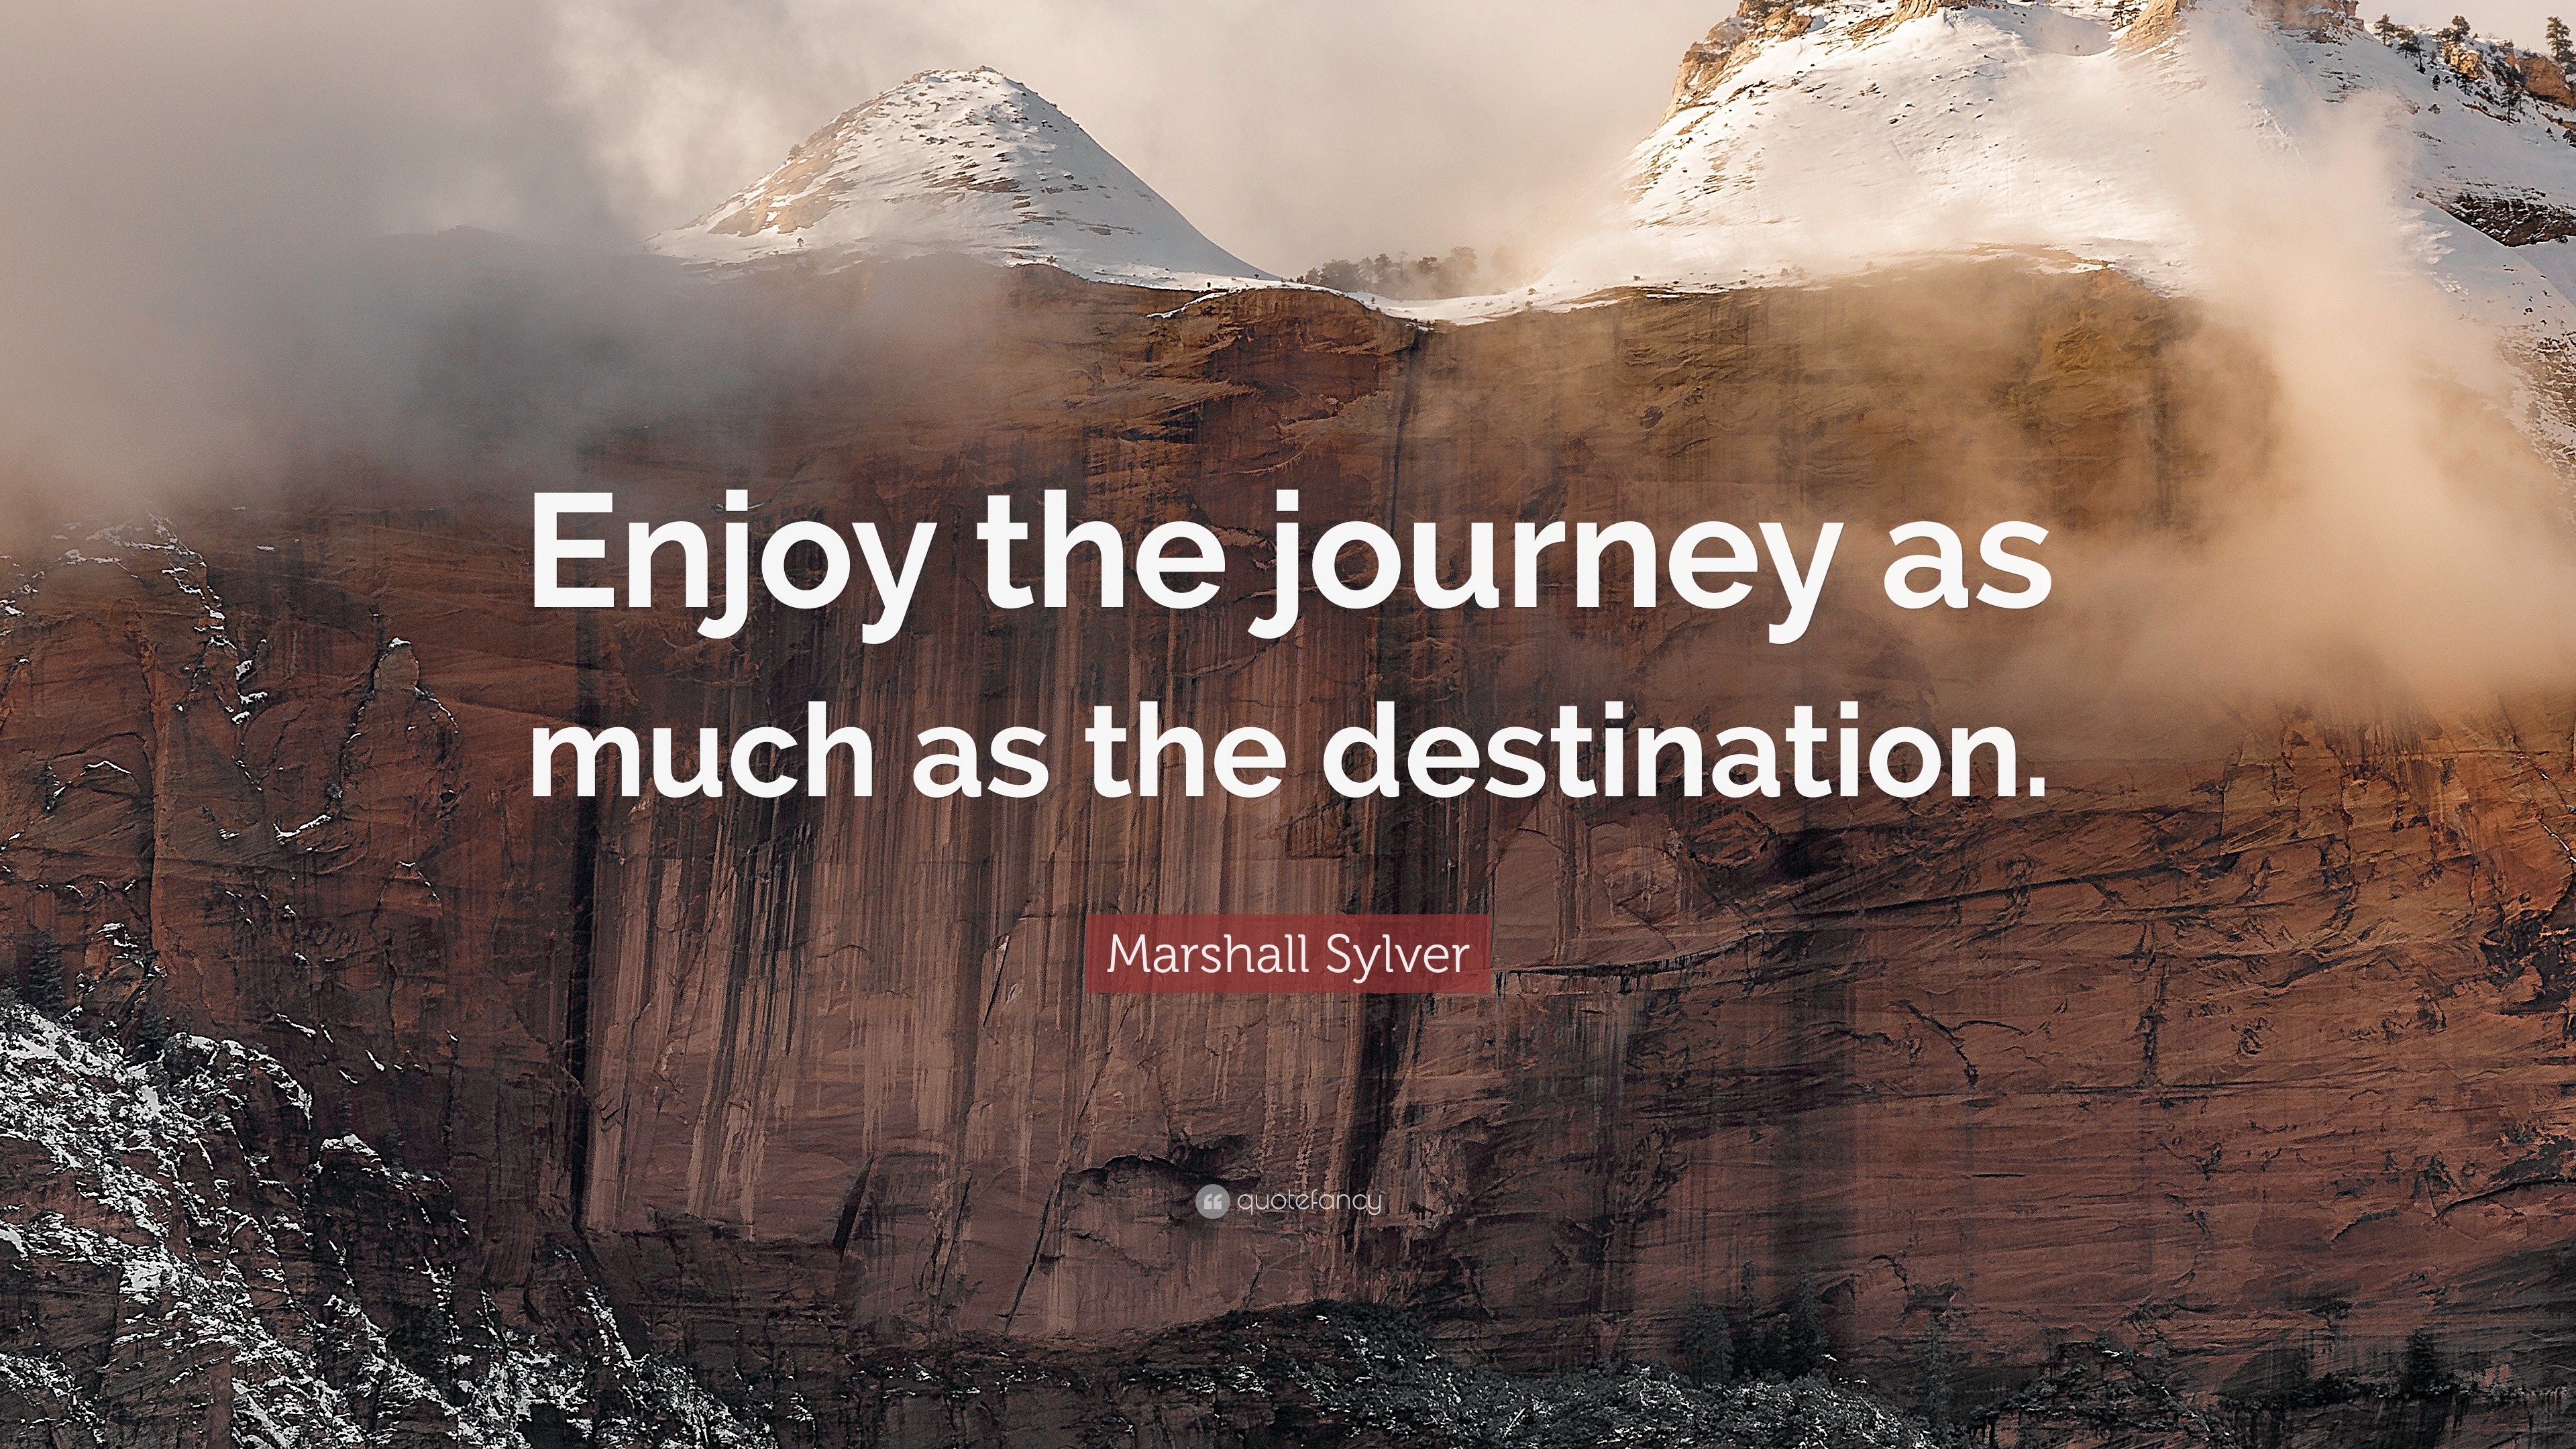 enjoy the journey as much as the destination meaning